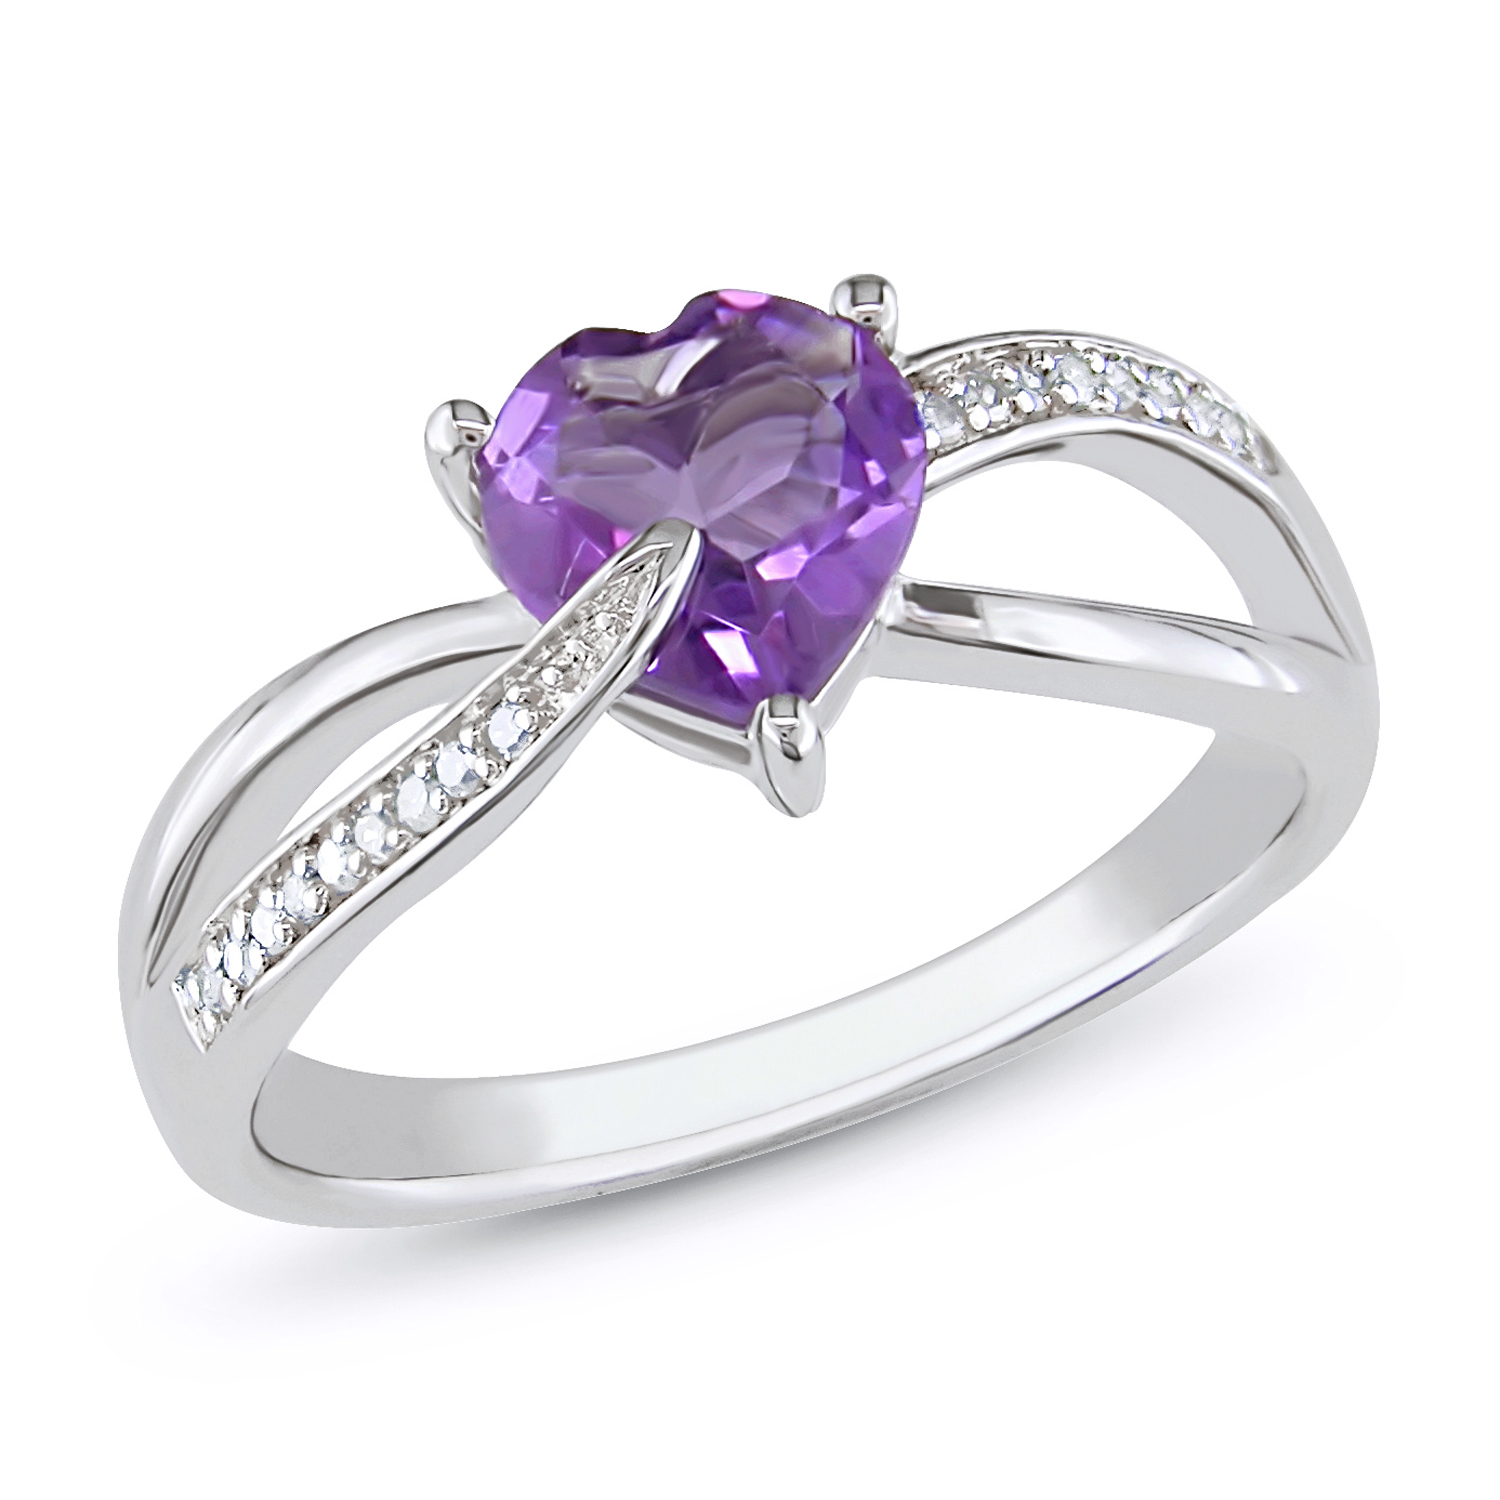 Amour 0.05 Carat T.W. Diamond and 1 Carat T.G.W. Amethyst Fashion Ring in Sterling Silver GH I3